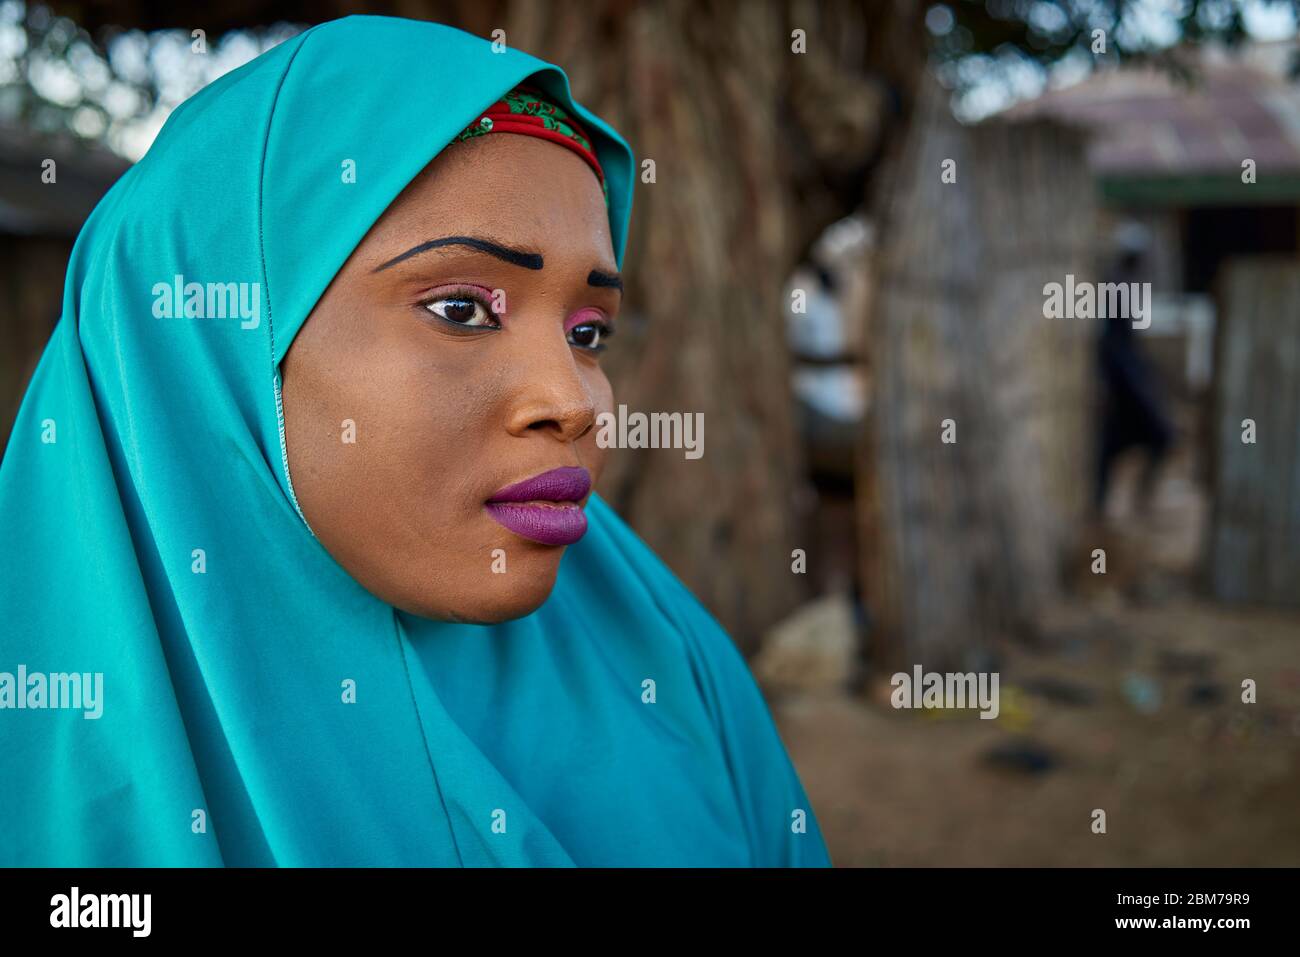 Portrait of a young Muslim woman with makeup, her head covered by a hijab. Stock Photo